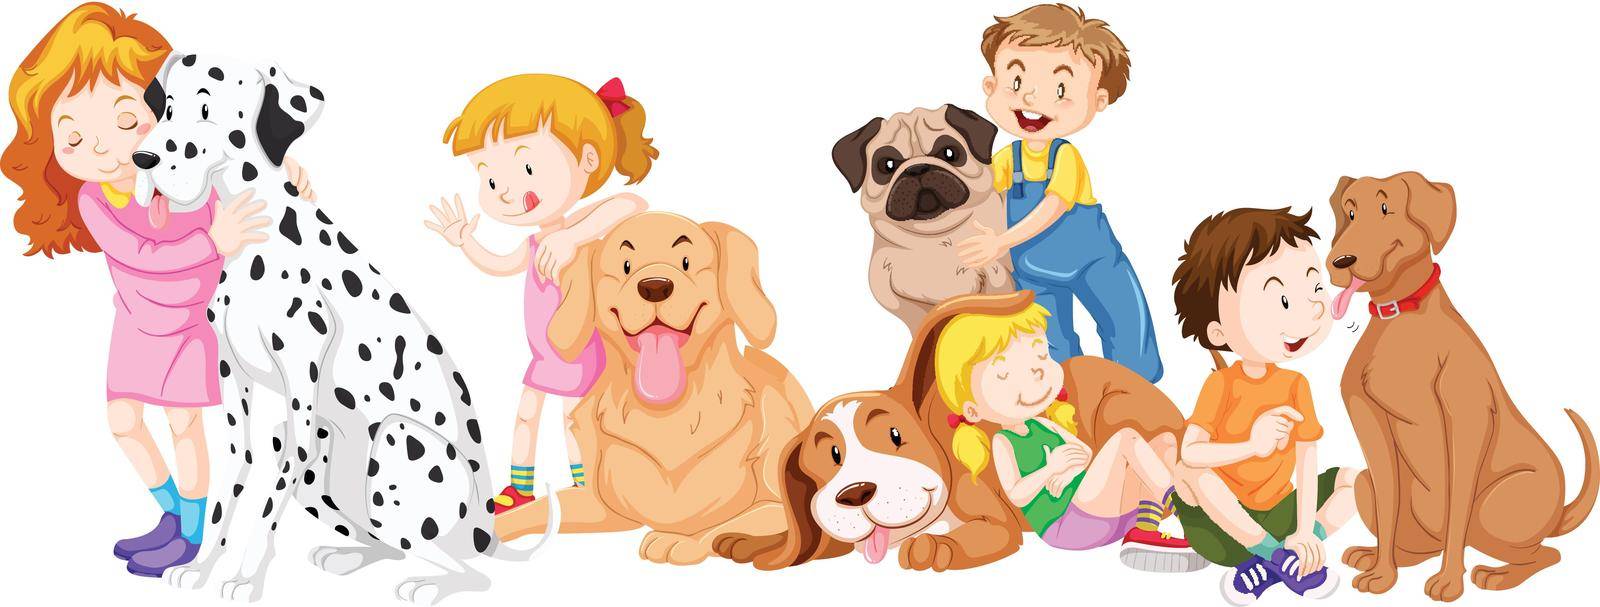 Children with pet dogs illustration